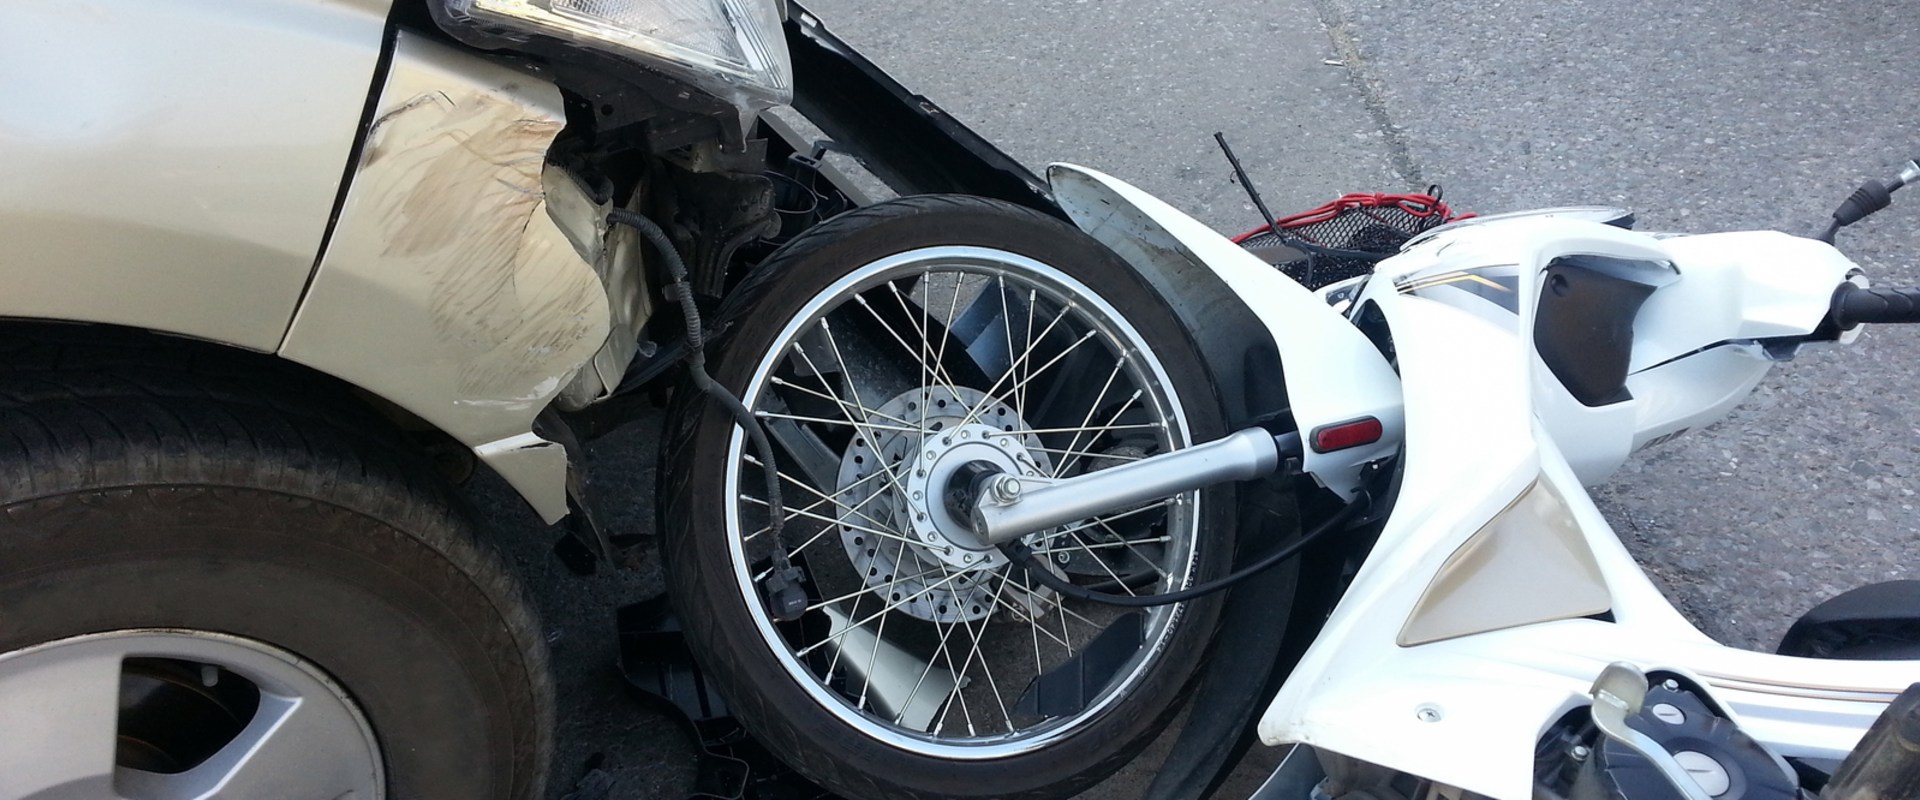 How To Deal With A Motorcycle Accident In Dallas